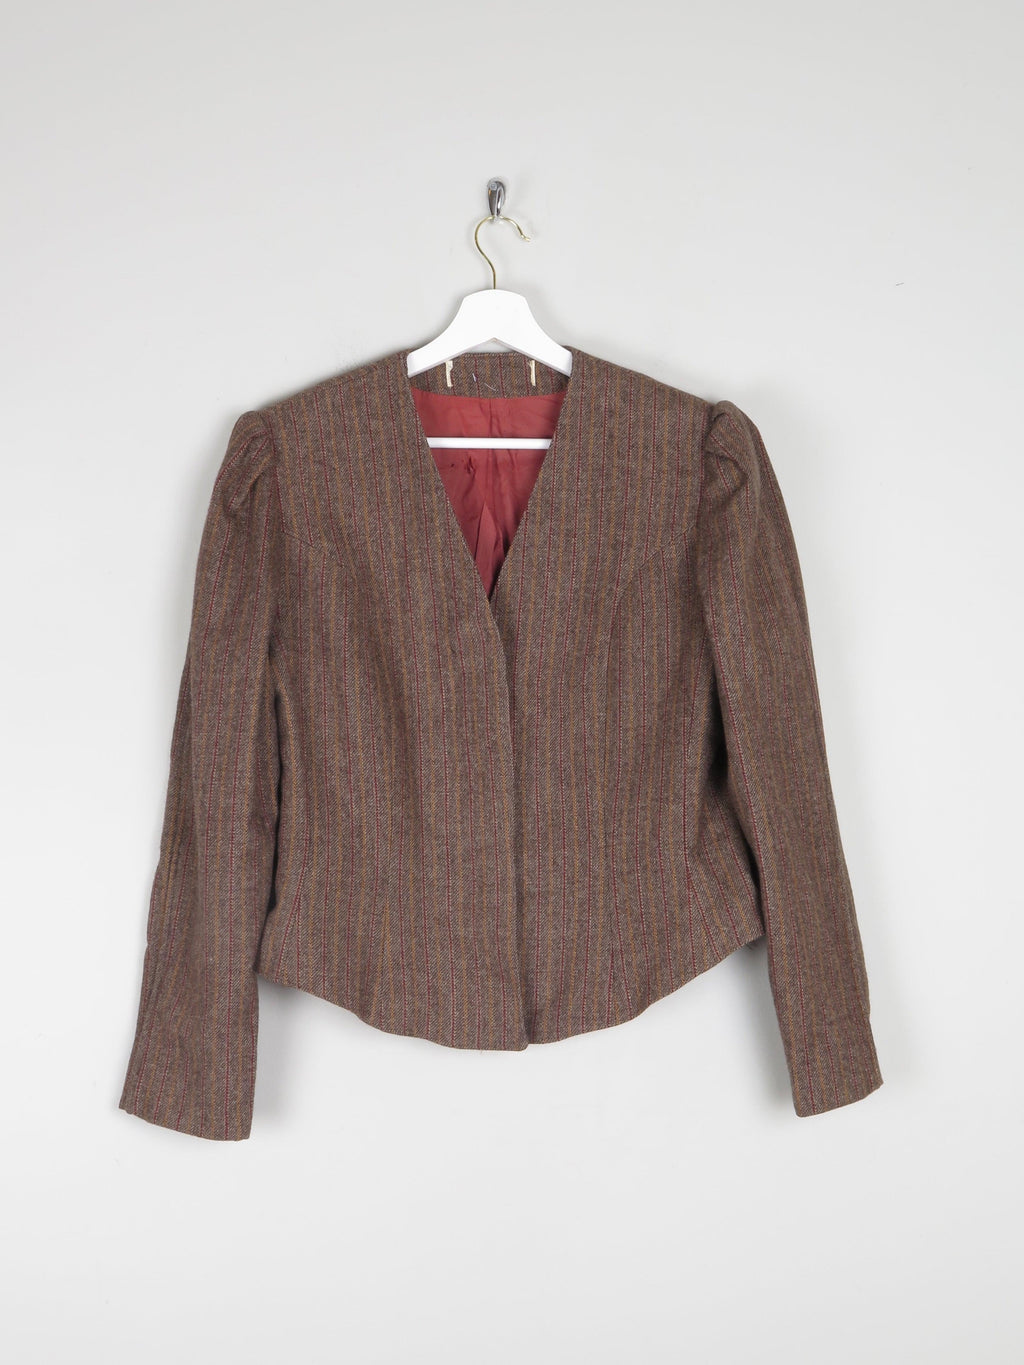 Women's Brown Tweed Fitted Cropped Jacket 10/12 - The Harlequin